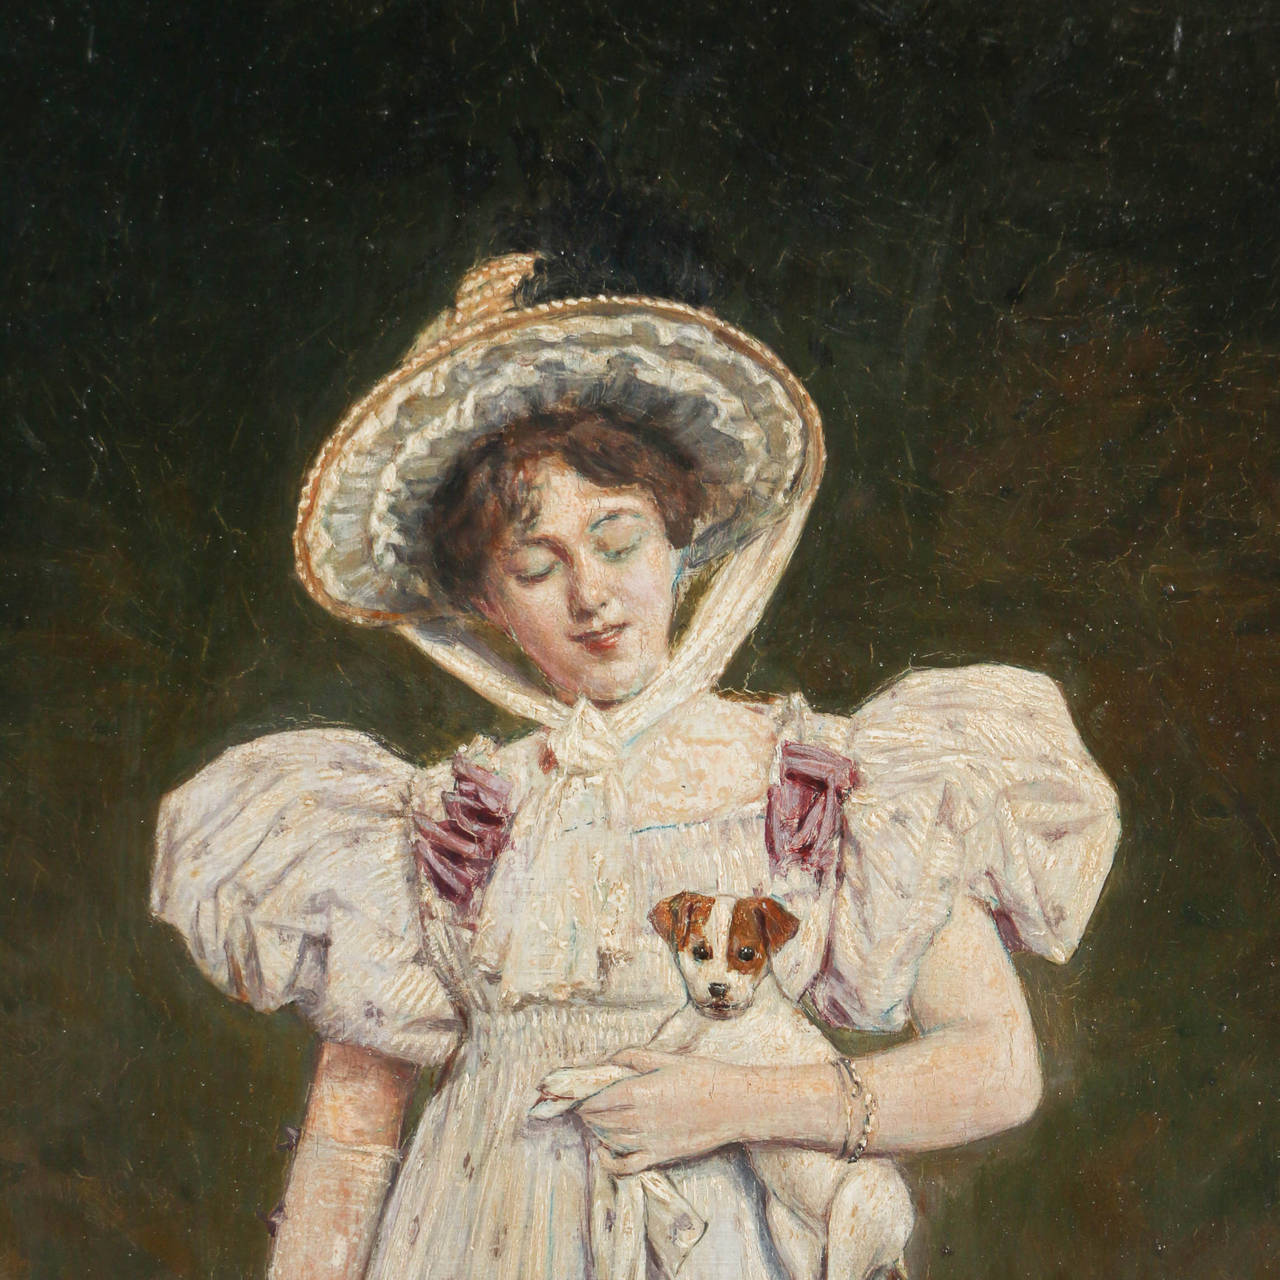 This delightful oil on wood painting depicts a young lady in a white dress and hat holding a small dog and black satchel purse. It is signed and dated Wald Sichelkow 1879, known also as Valdmar Sichelkow.